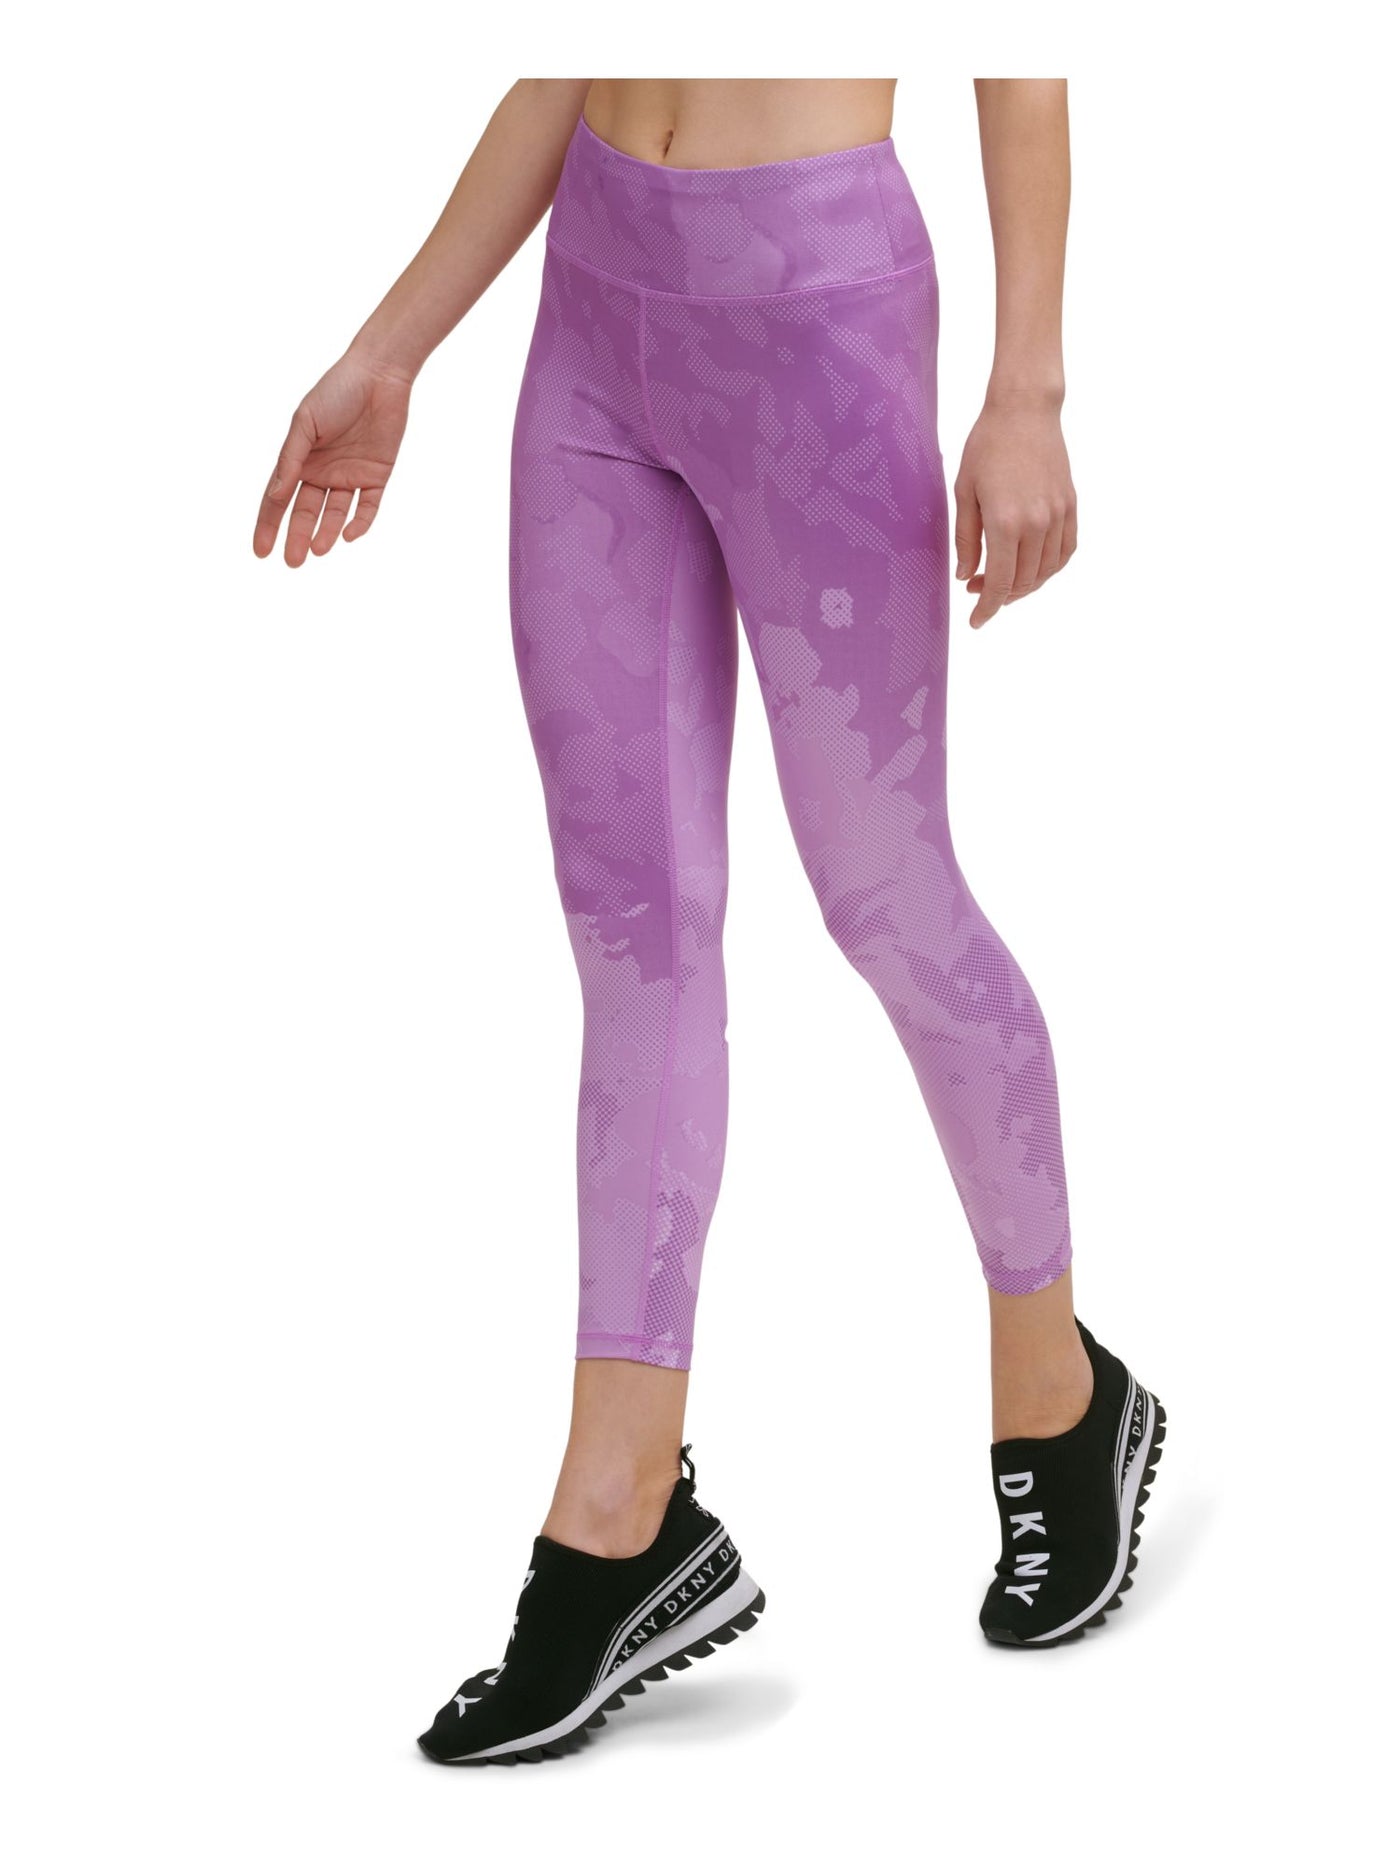 DKNY Womens Purple Moisture Wicking Pocketed Stretch Pull On Style Printed Active Wear High Waist Leggings M